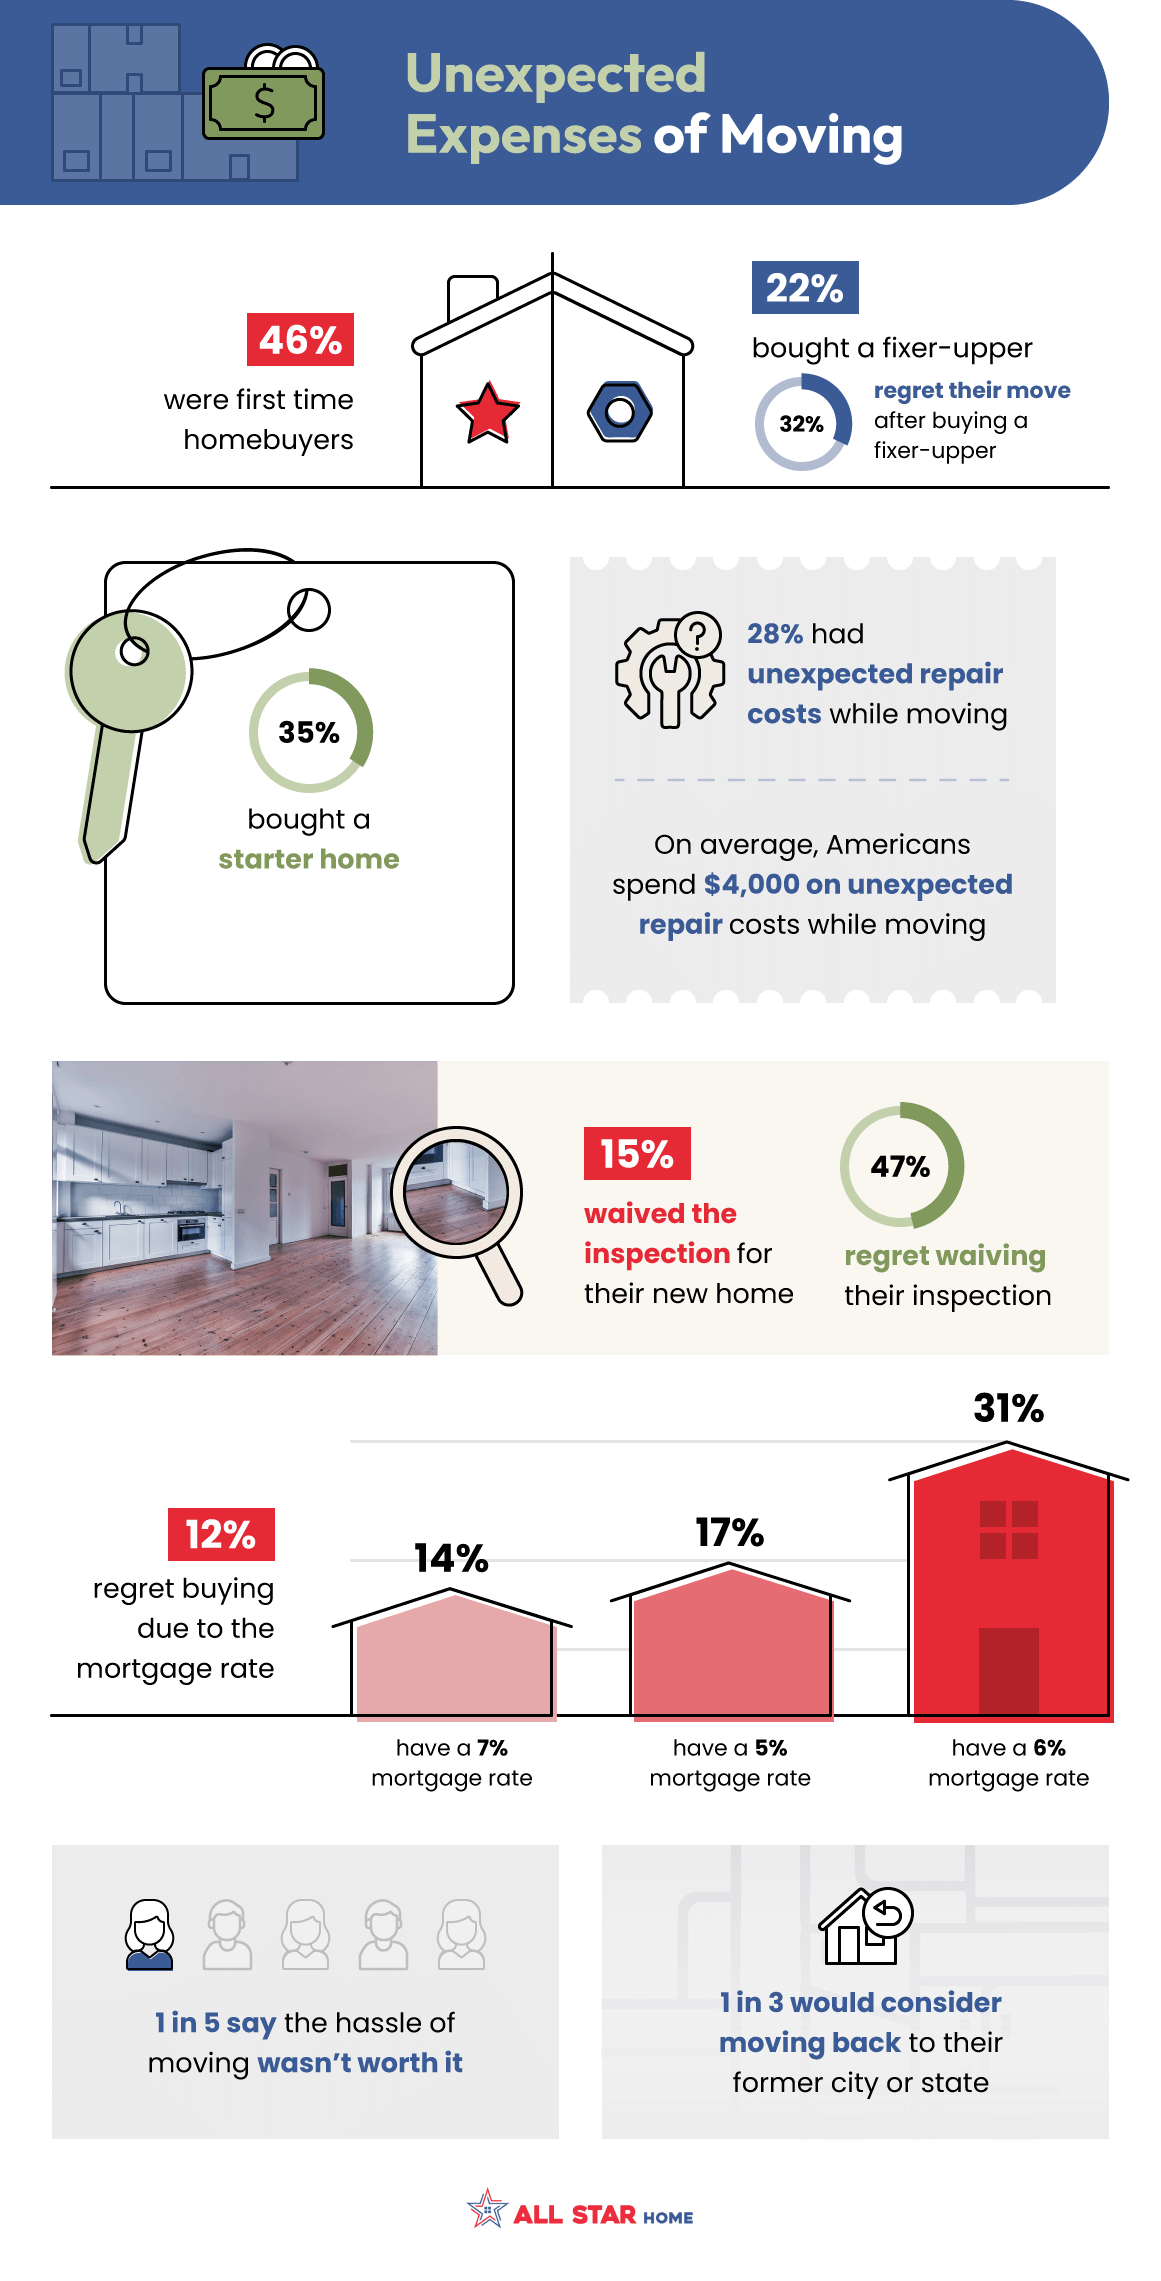 The Unexpected Expenses of Moving in the U.S. data infographic from allstarhome.com